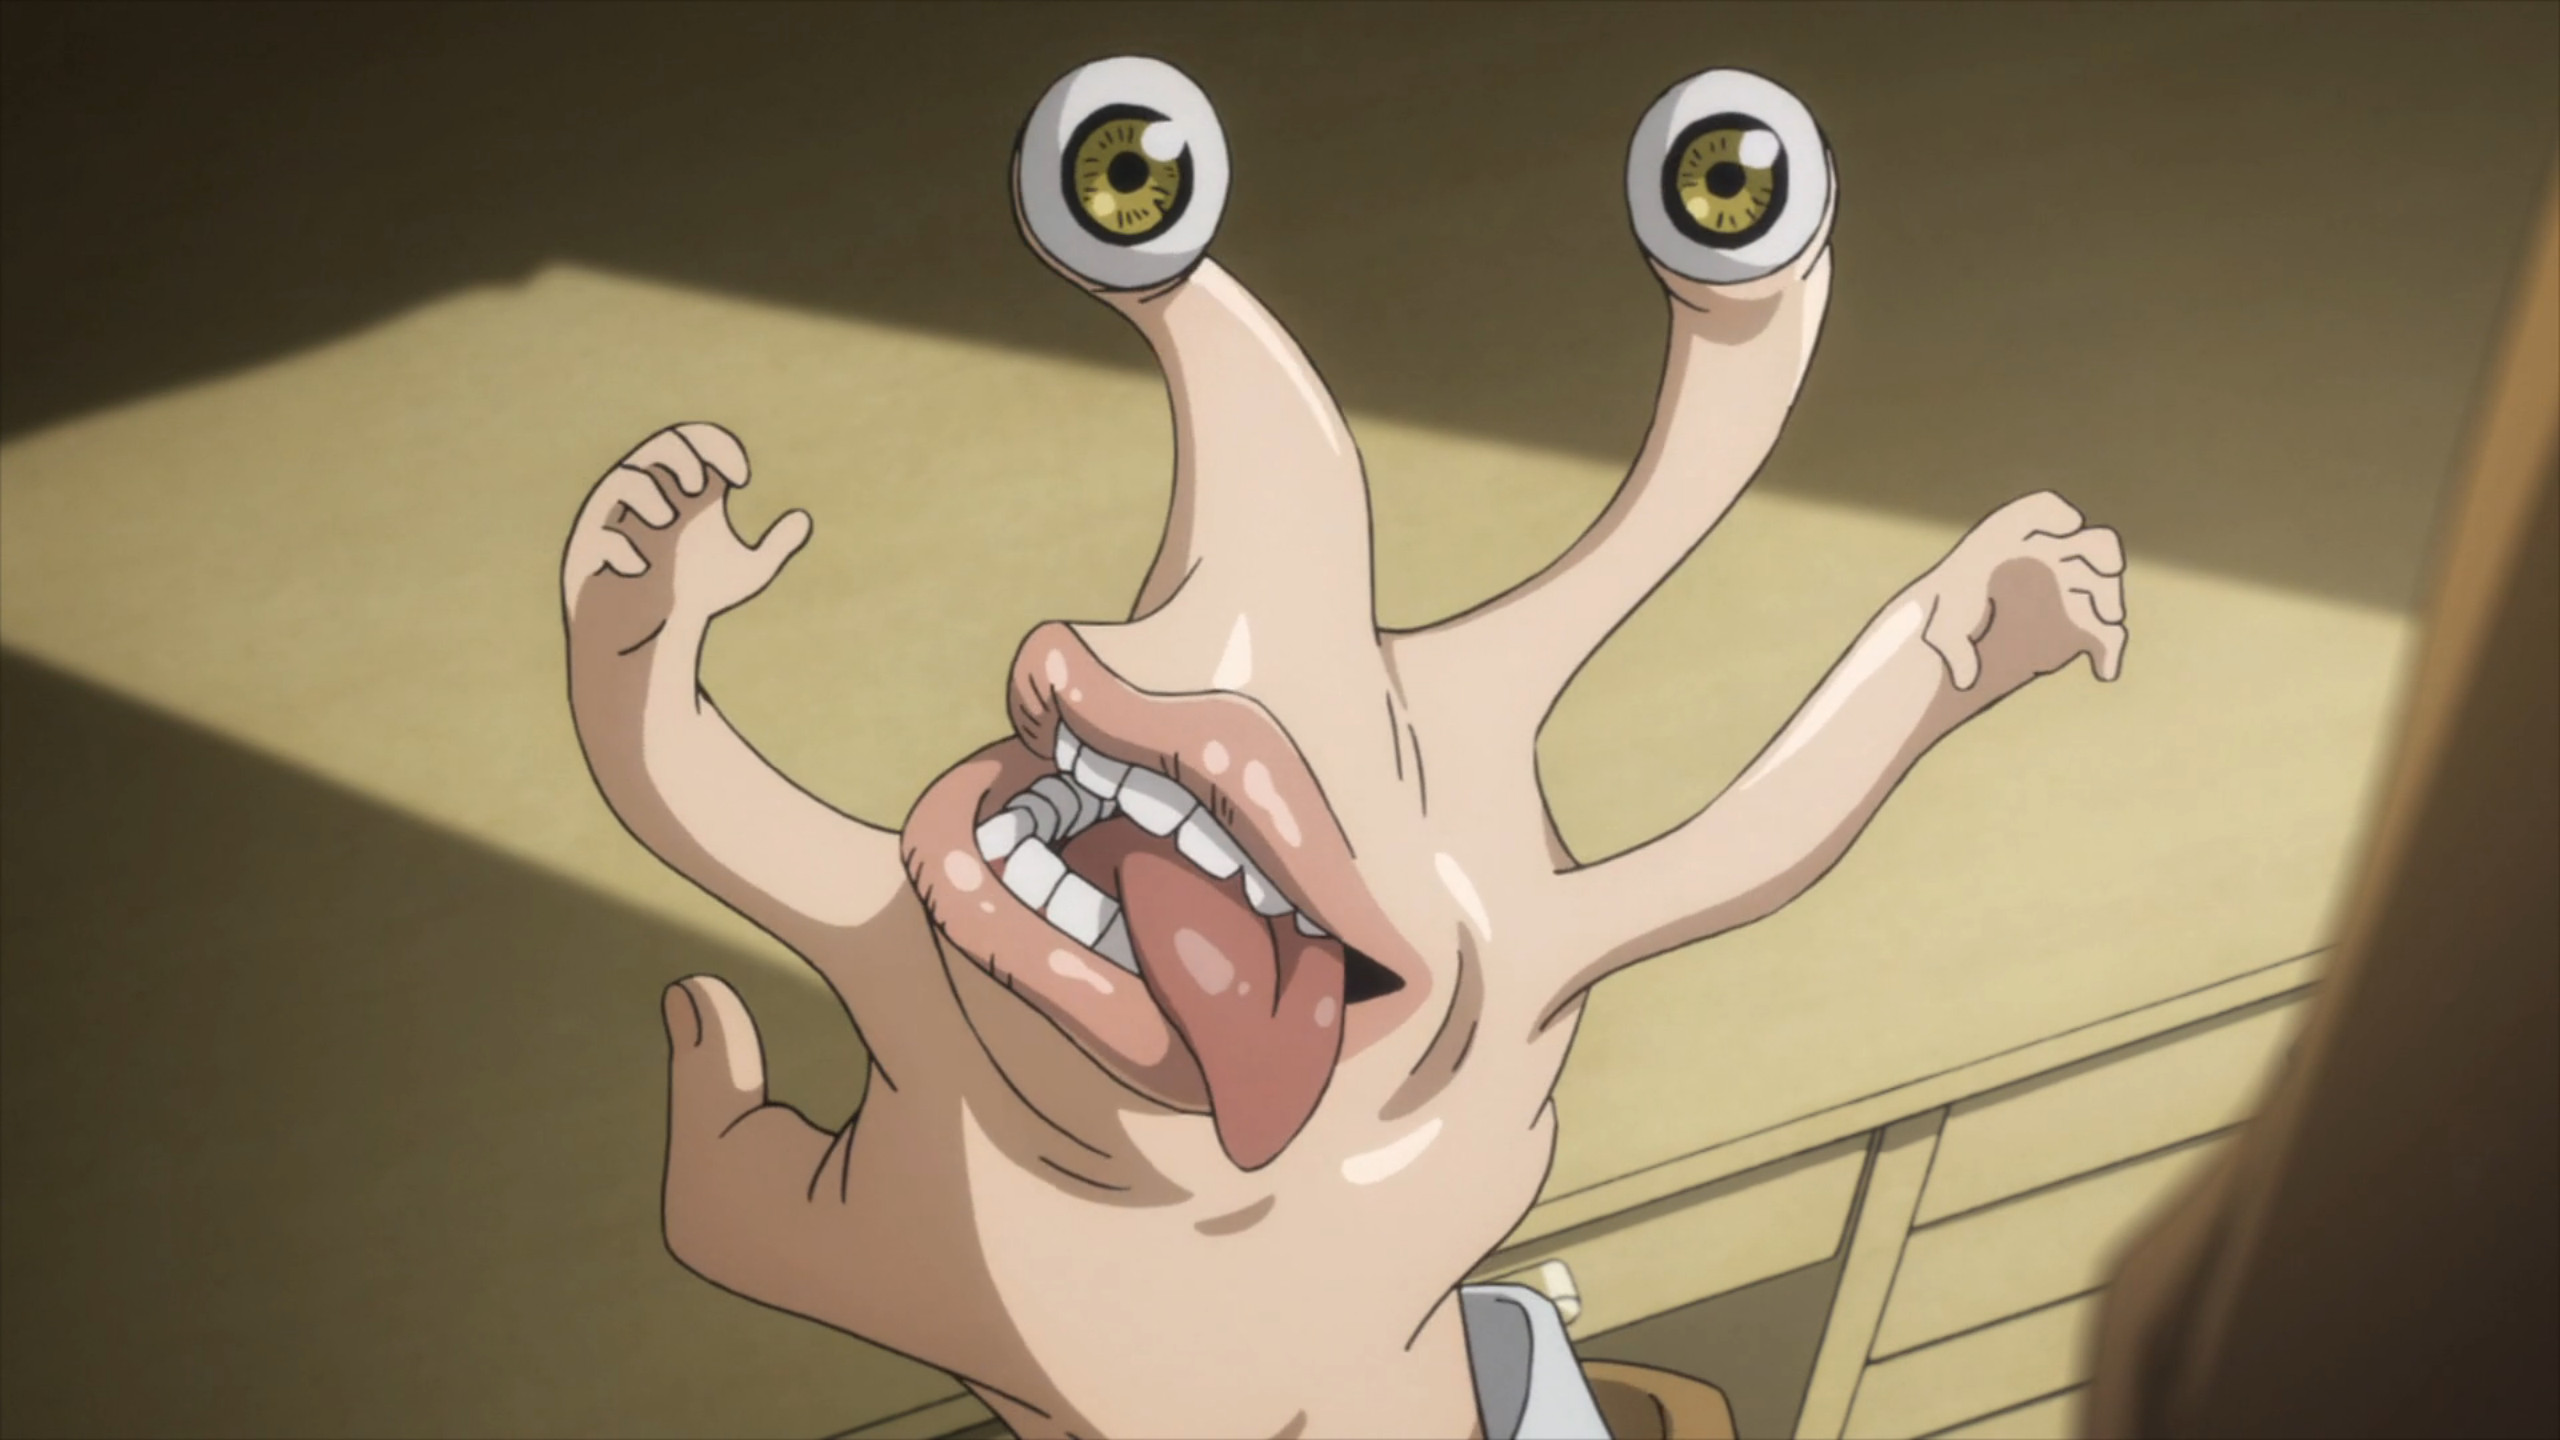 And The Parasyte Fancast Contest Winners Are...